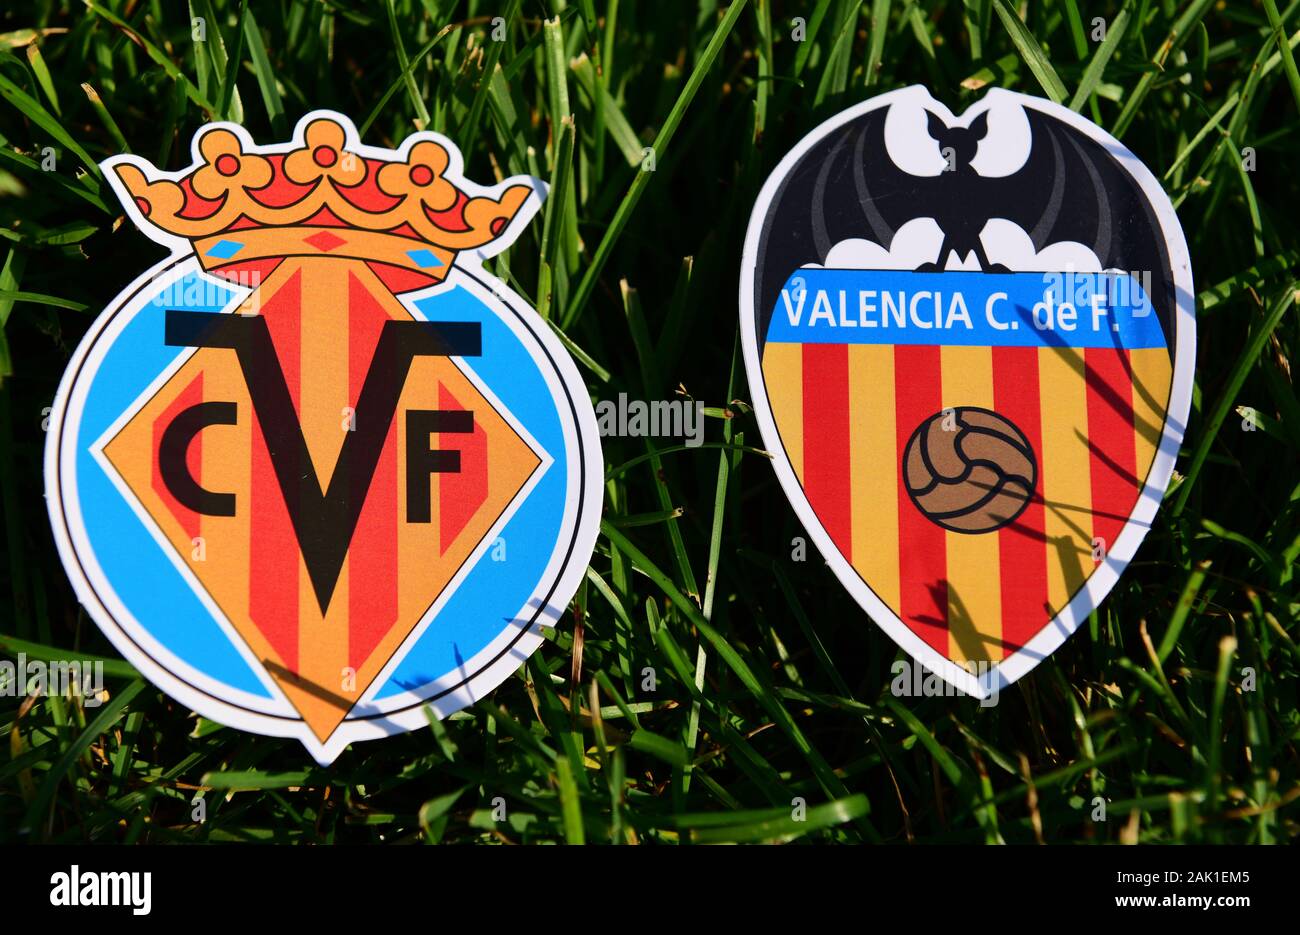 Fudbalski amblemi - Page 6 September-6-2019-madrid-spain-emblems-of-spanish-football-clubs-villarreal-and-valencia-on-the-green-grass-of-the-lawn-2AK1EM5